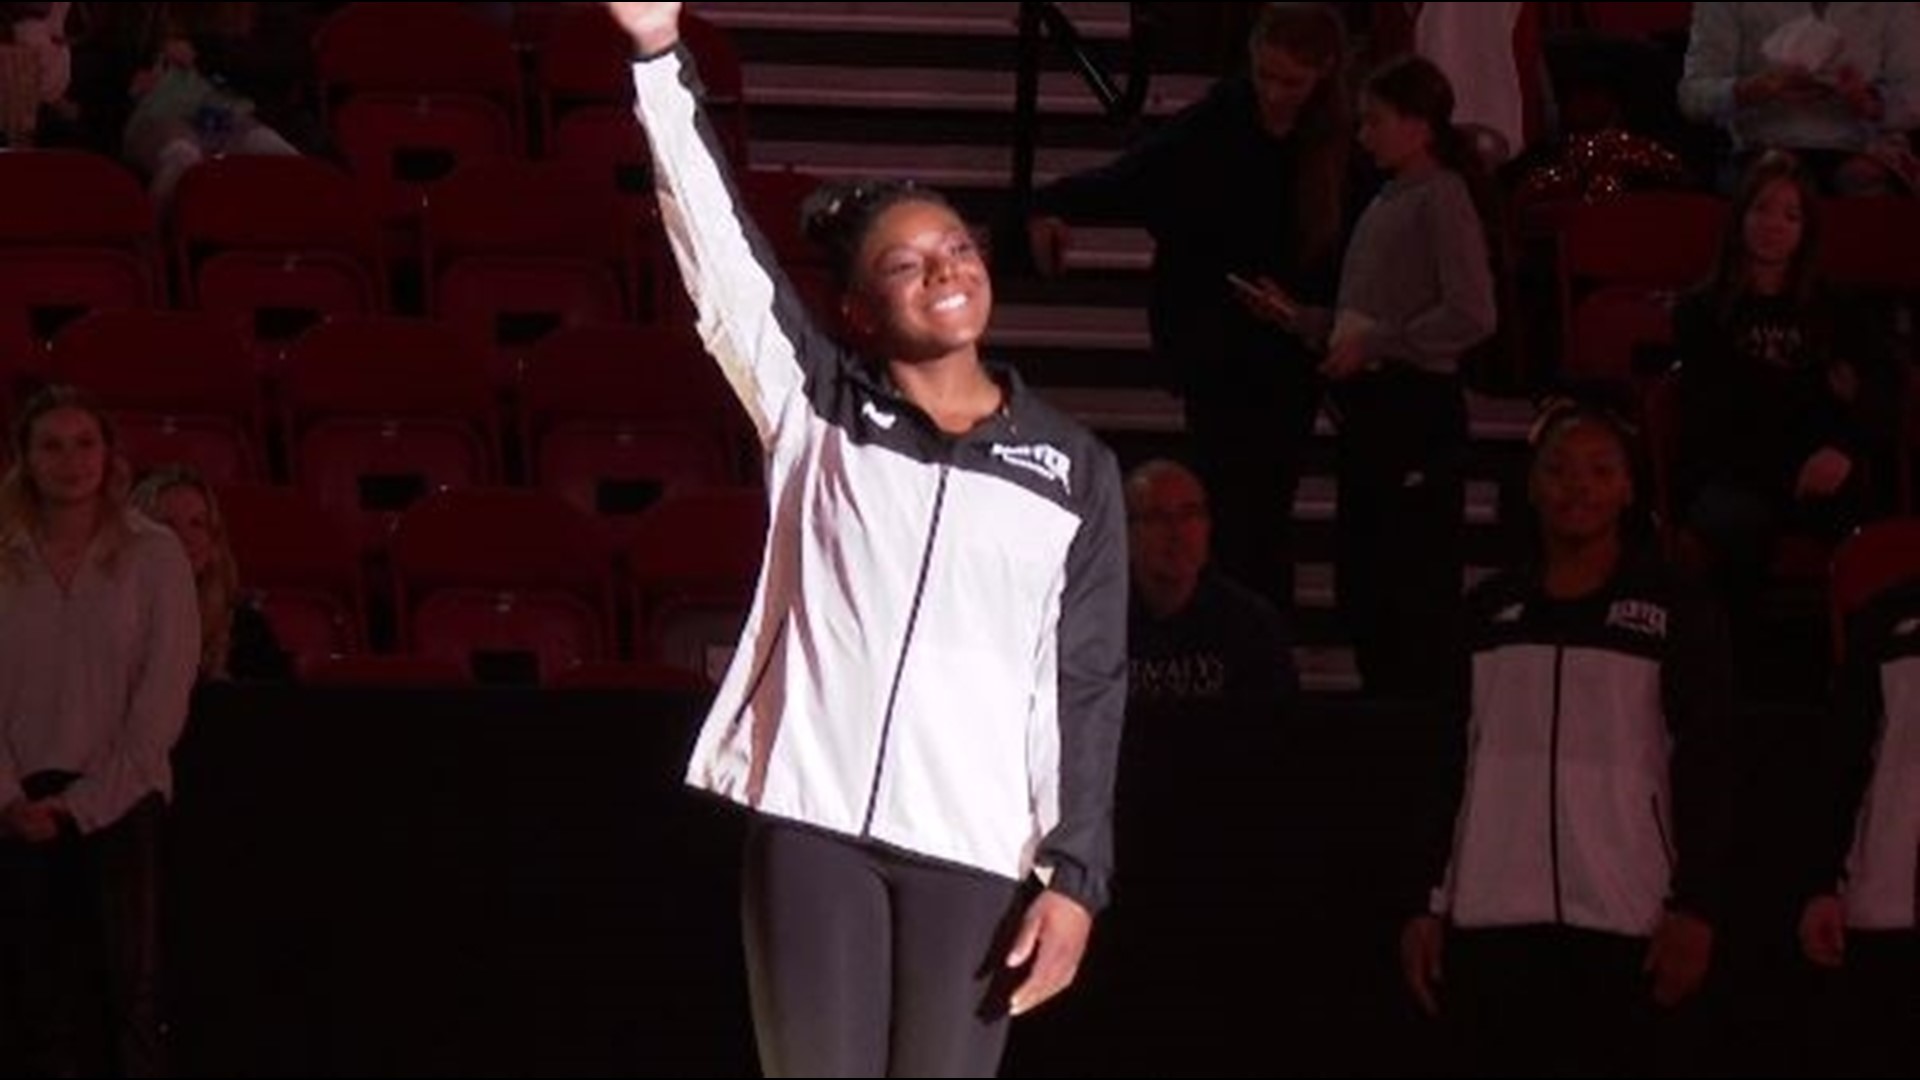 Lynnzee Brown won the 2019 NCAA Floor Exercise National Championship and will be attending her fourth national championship in her six years at University of Denver.